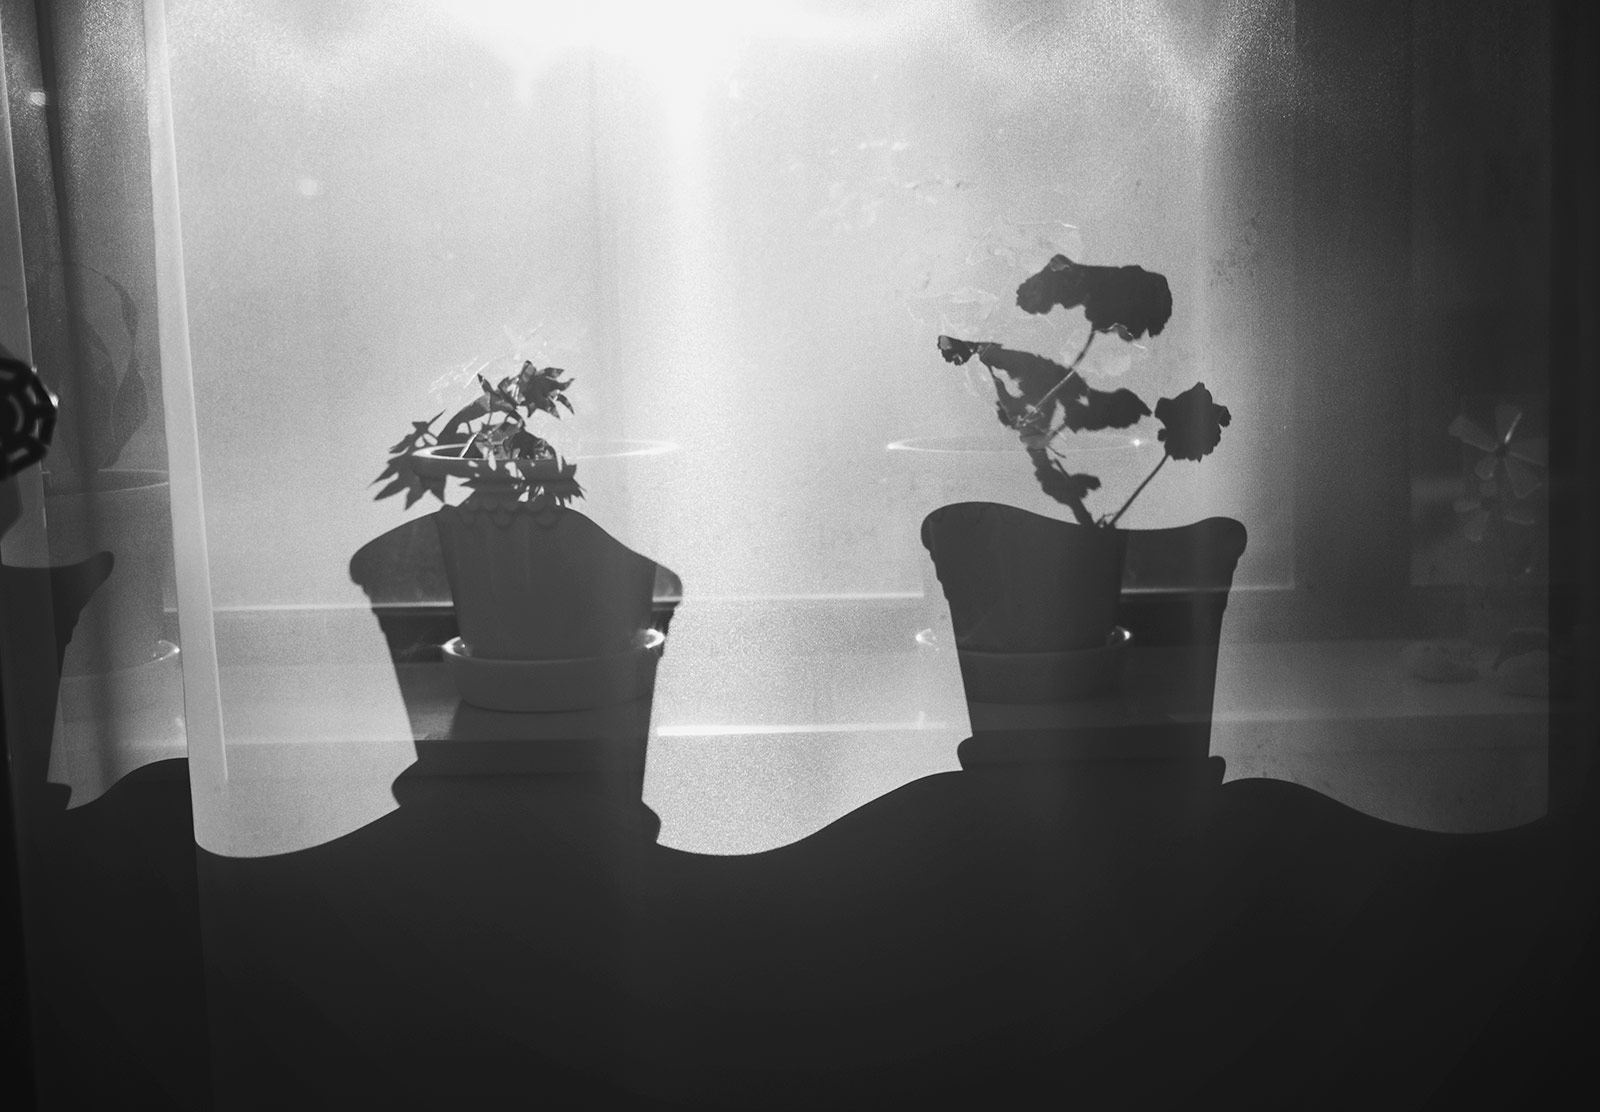 Plant silhouettes